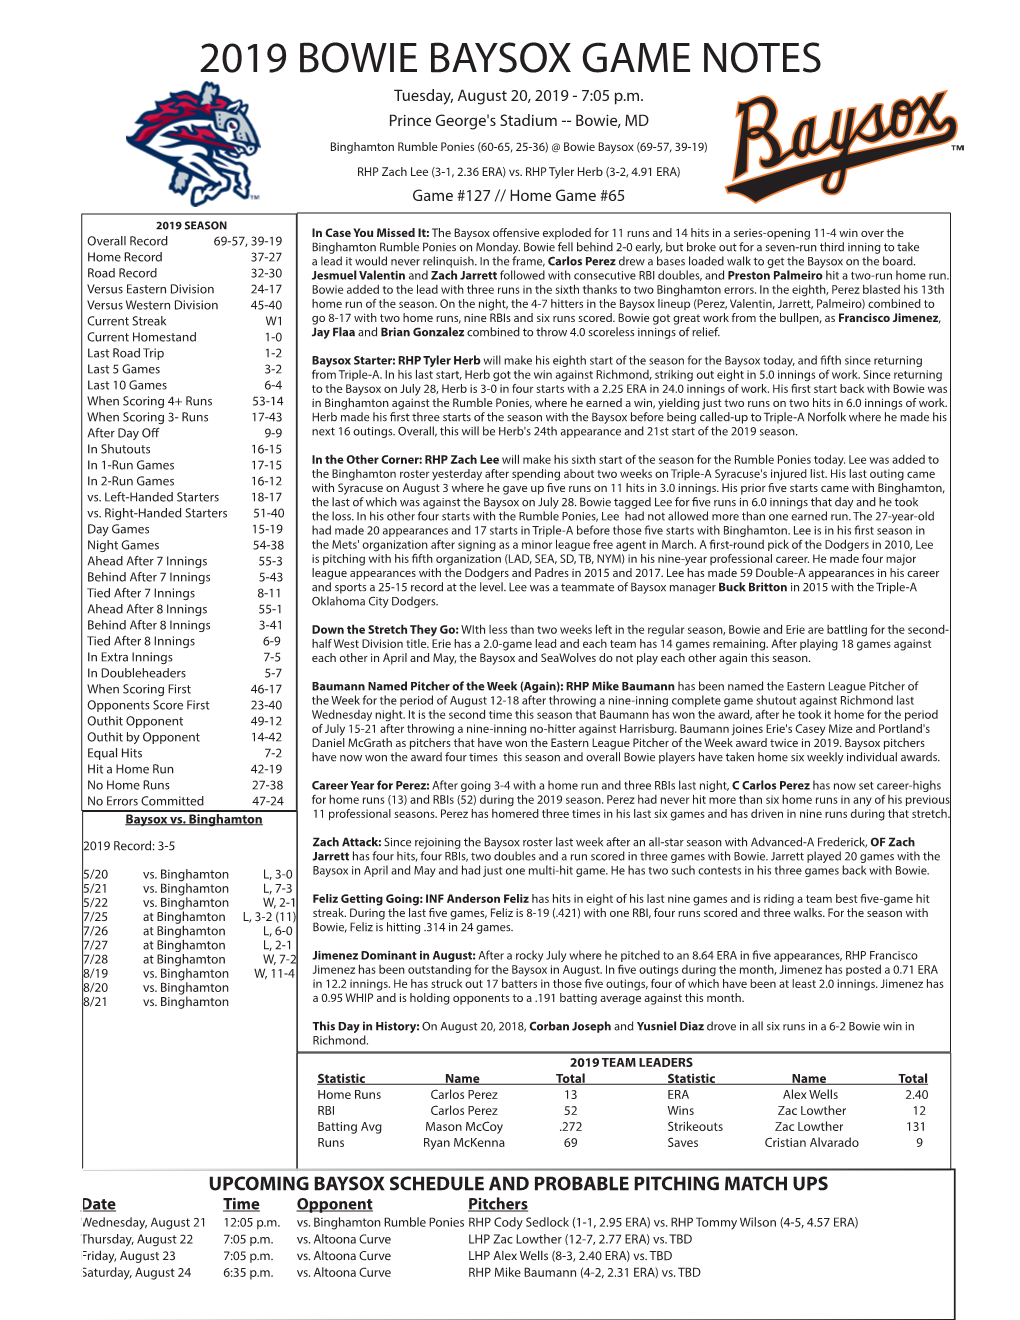 2019 BOWIE BAYSOX GAME NOTES Tuesday, August 20, 2019 - 7:05 P.M